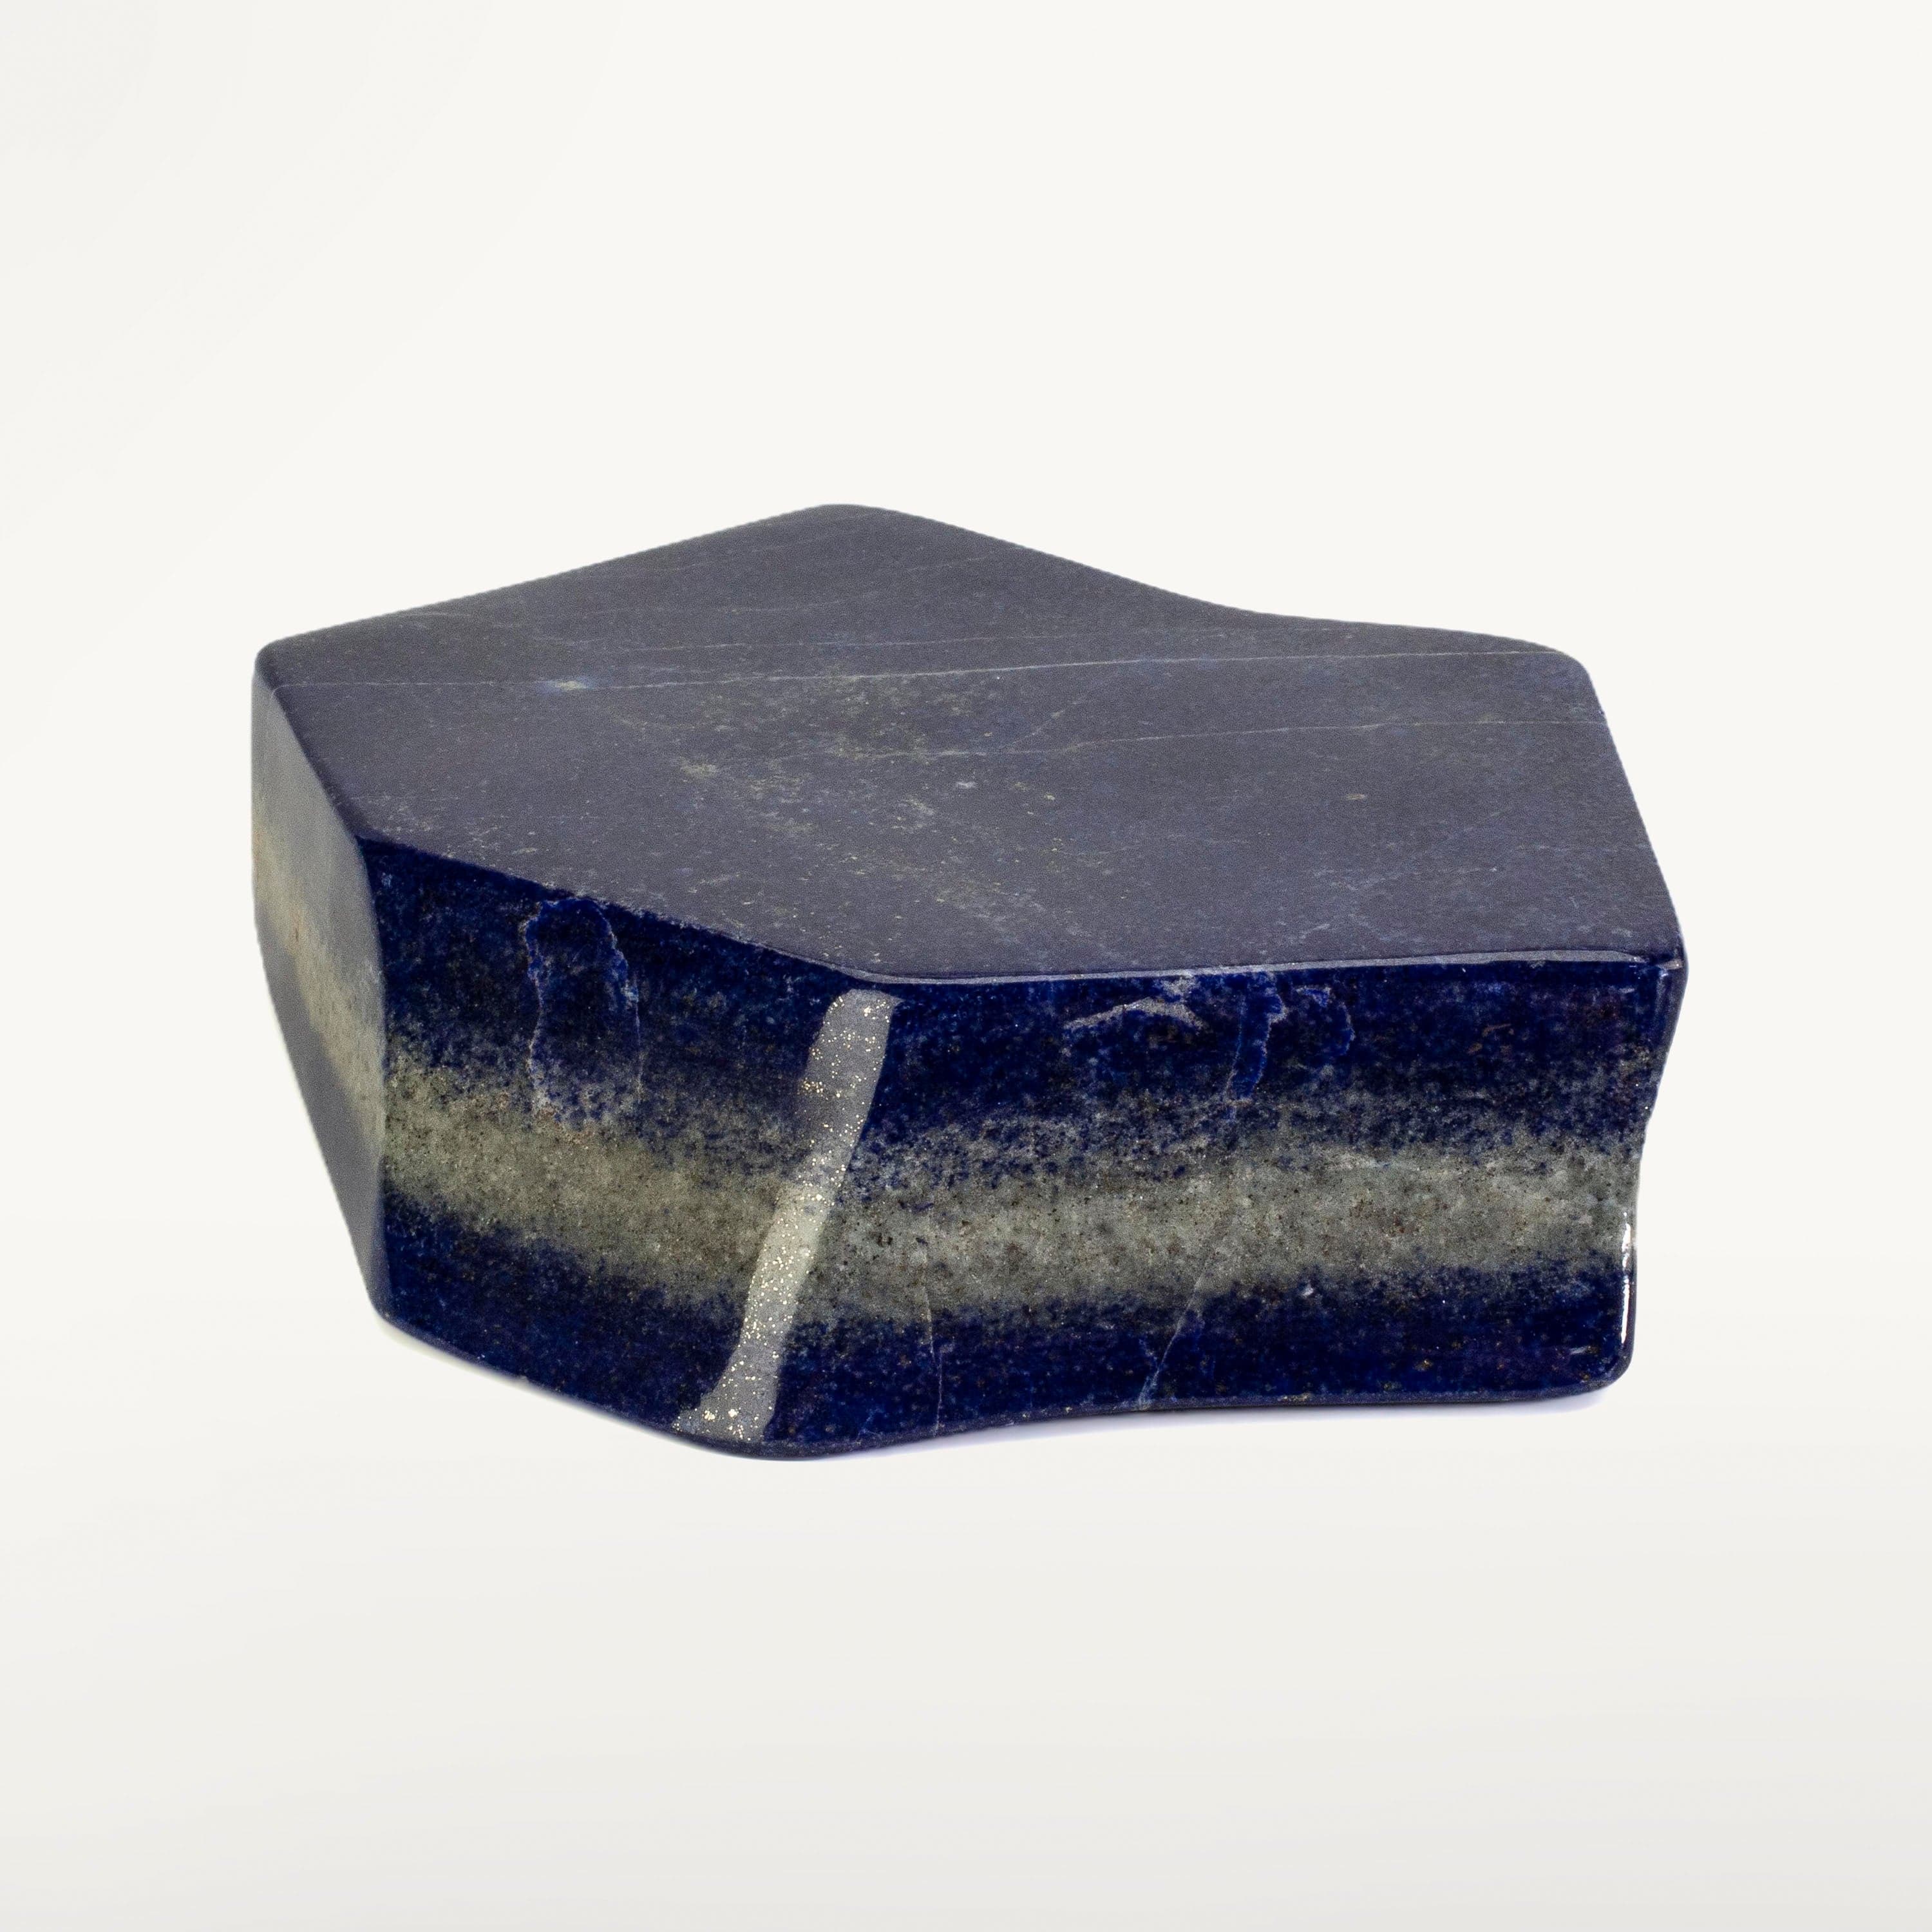 Kalifano Lapis Lapis Lazuil Freeform from Afghanistan - 1.1 kg / 2.4 lbs LP1200.003